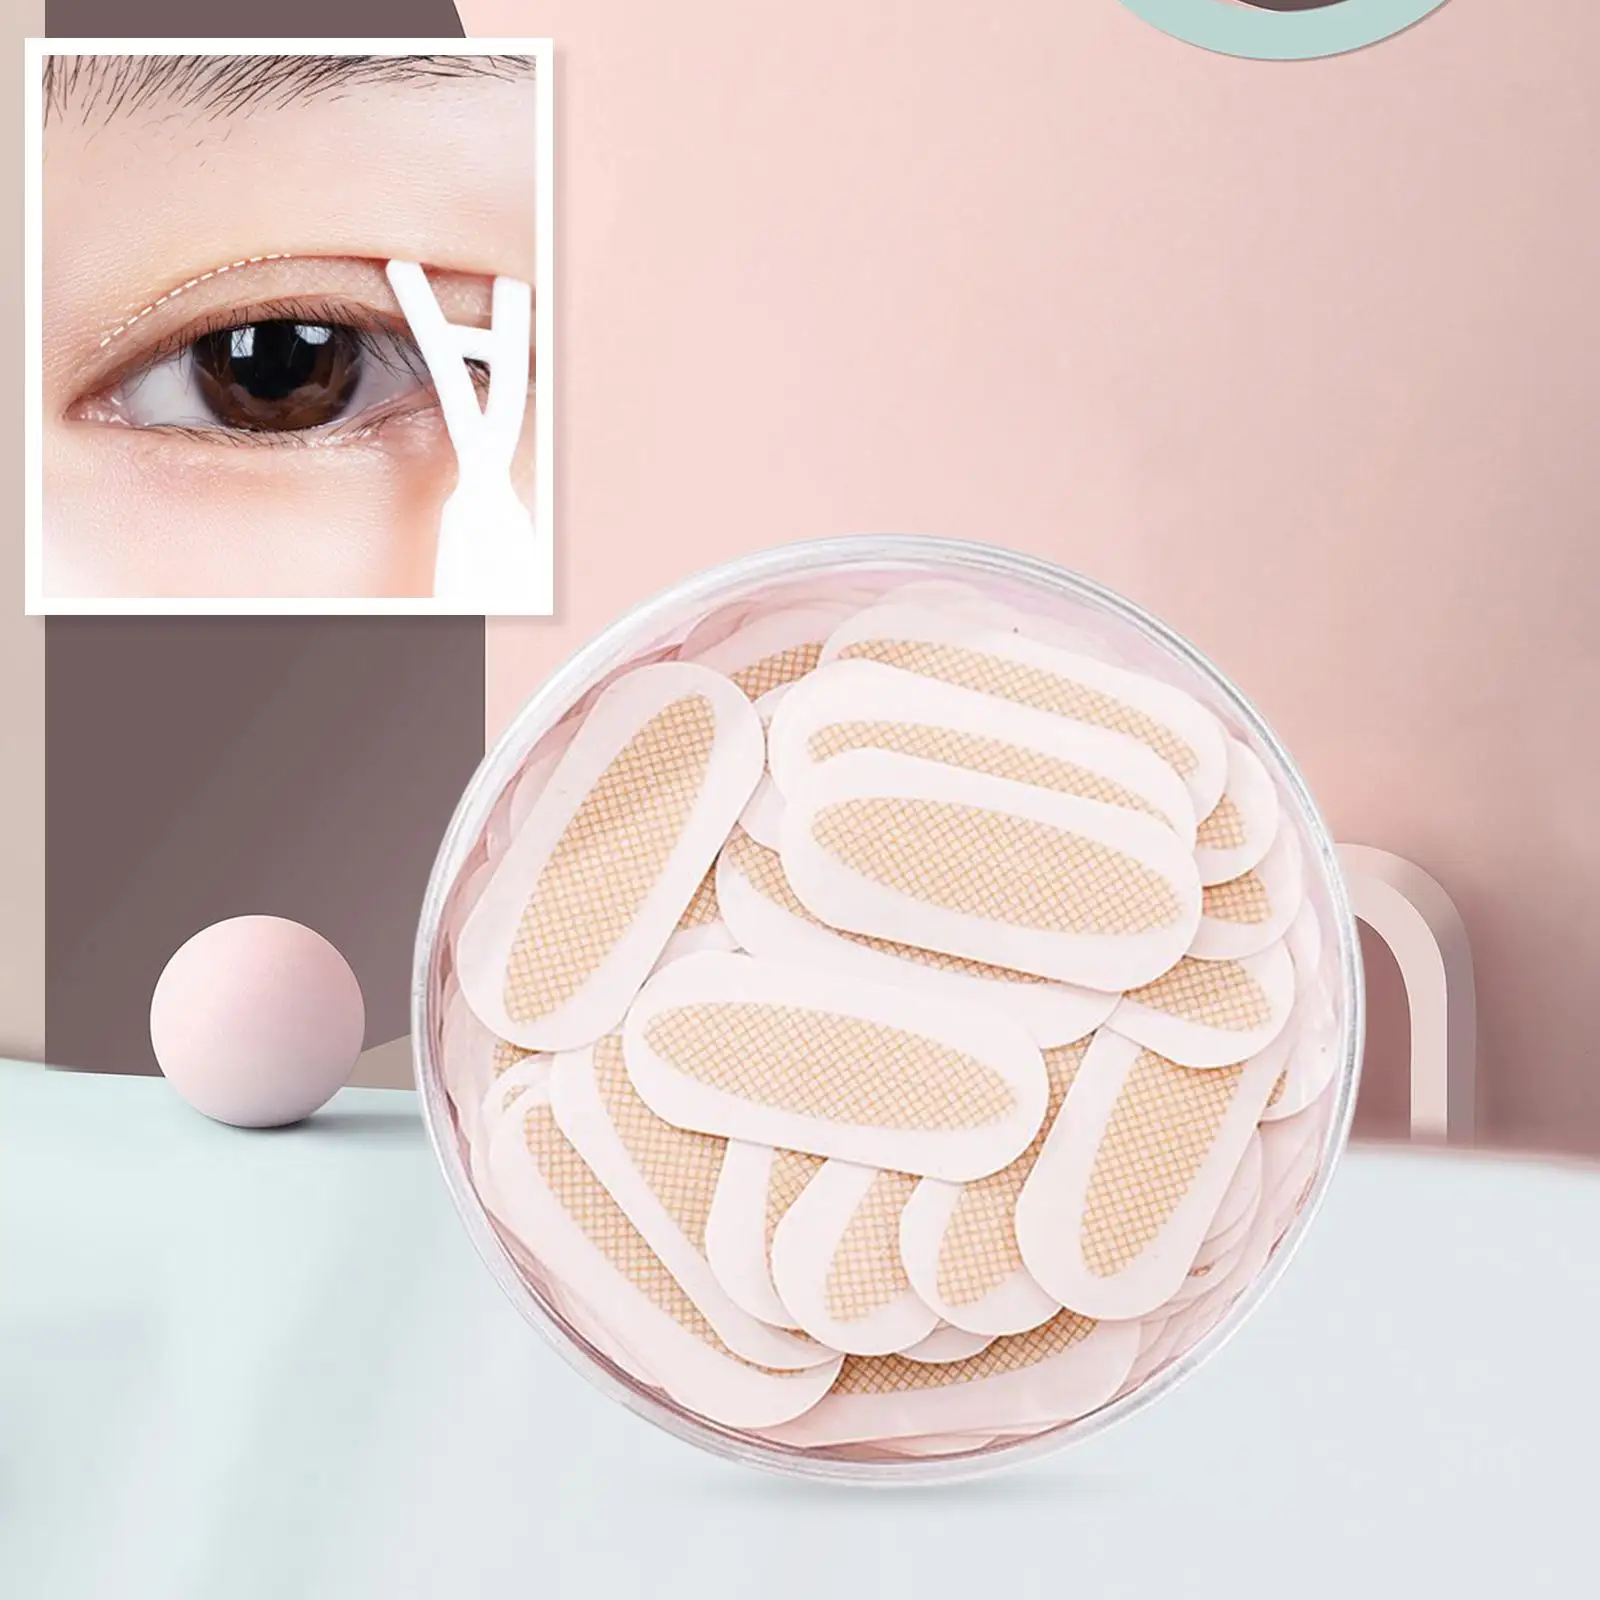 300-In-Pack Double Eyelid Stickers Self-Adhesive Breathable Waterproof Fold Eyelid Tape Eyelid Tape for Eyes Make Up Ceremony